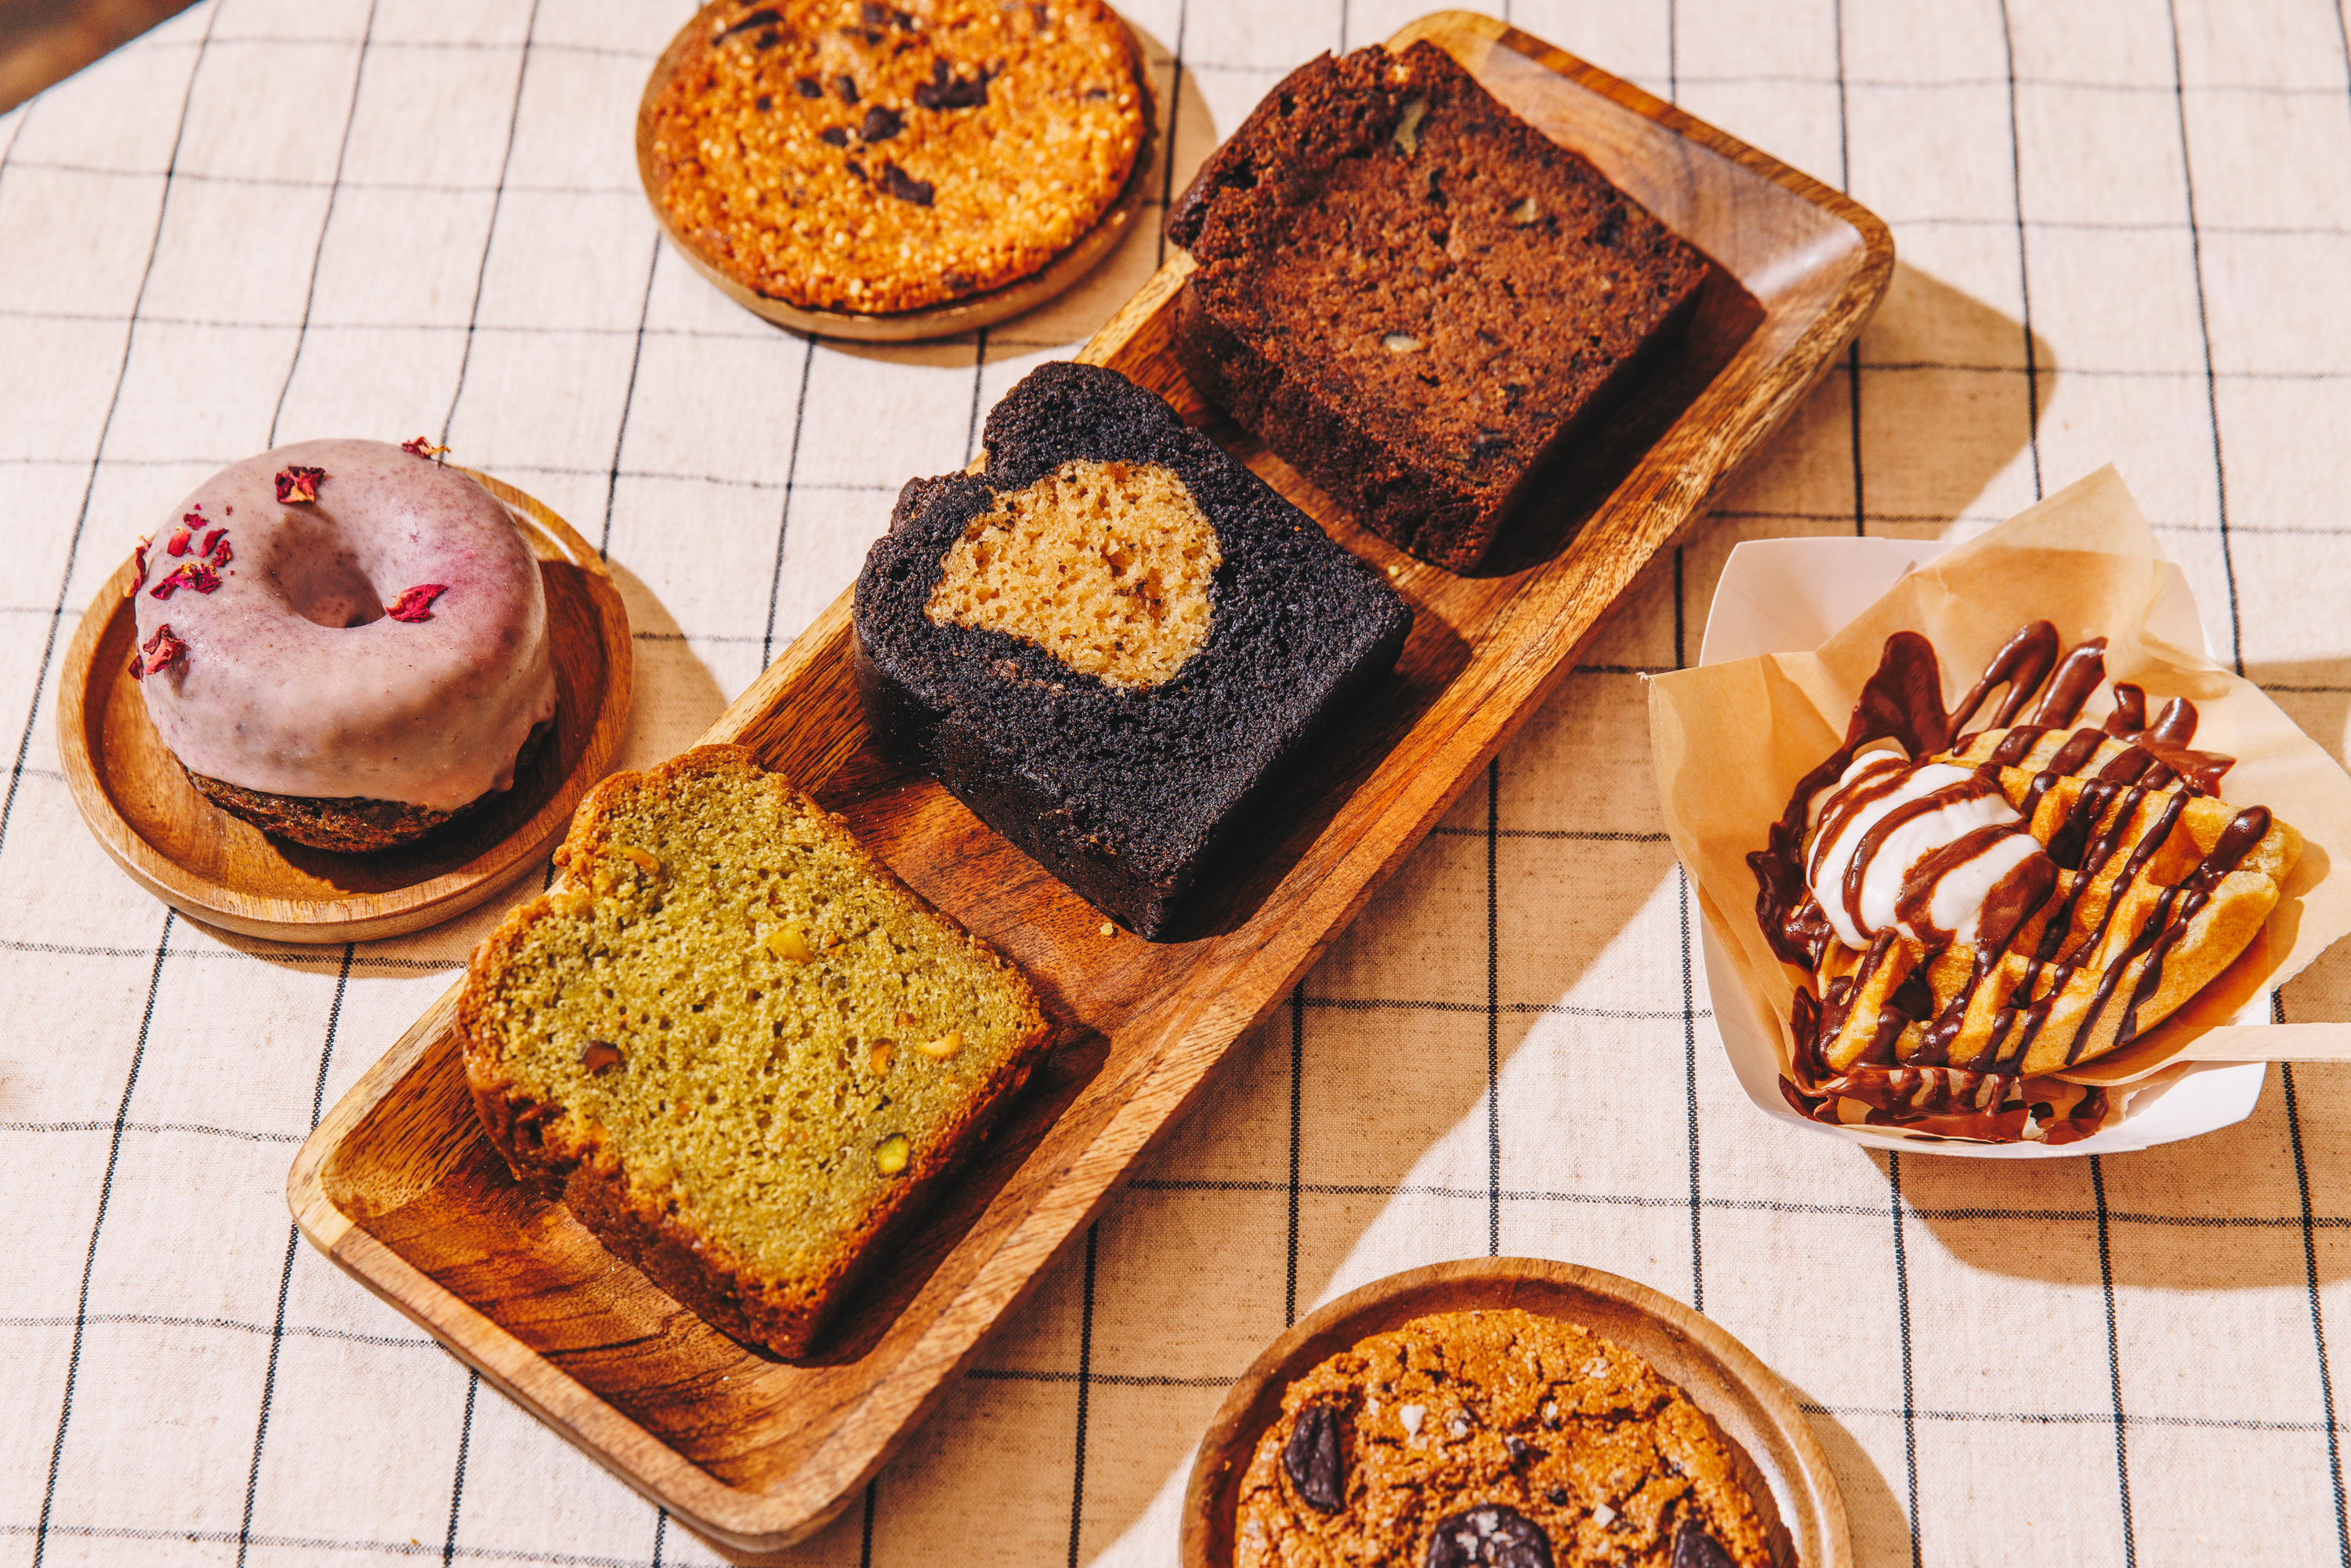 A selection of gluten-free baked goods from Sixteen Mill.